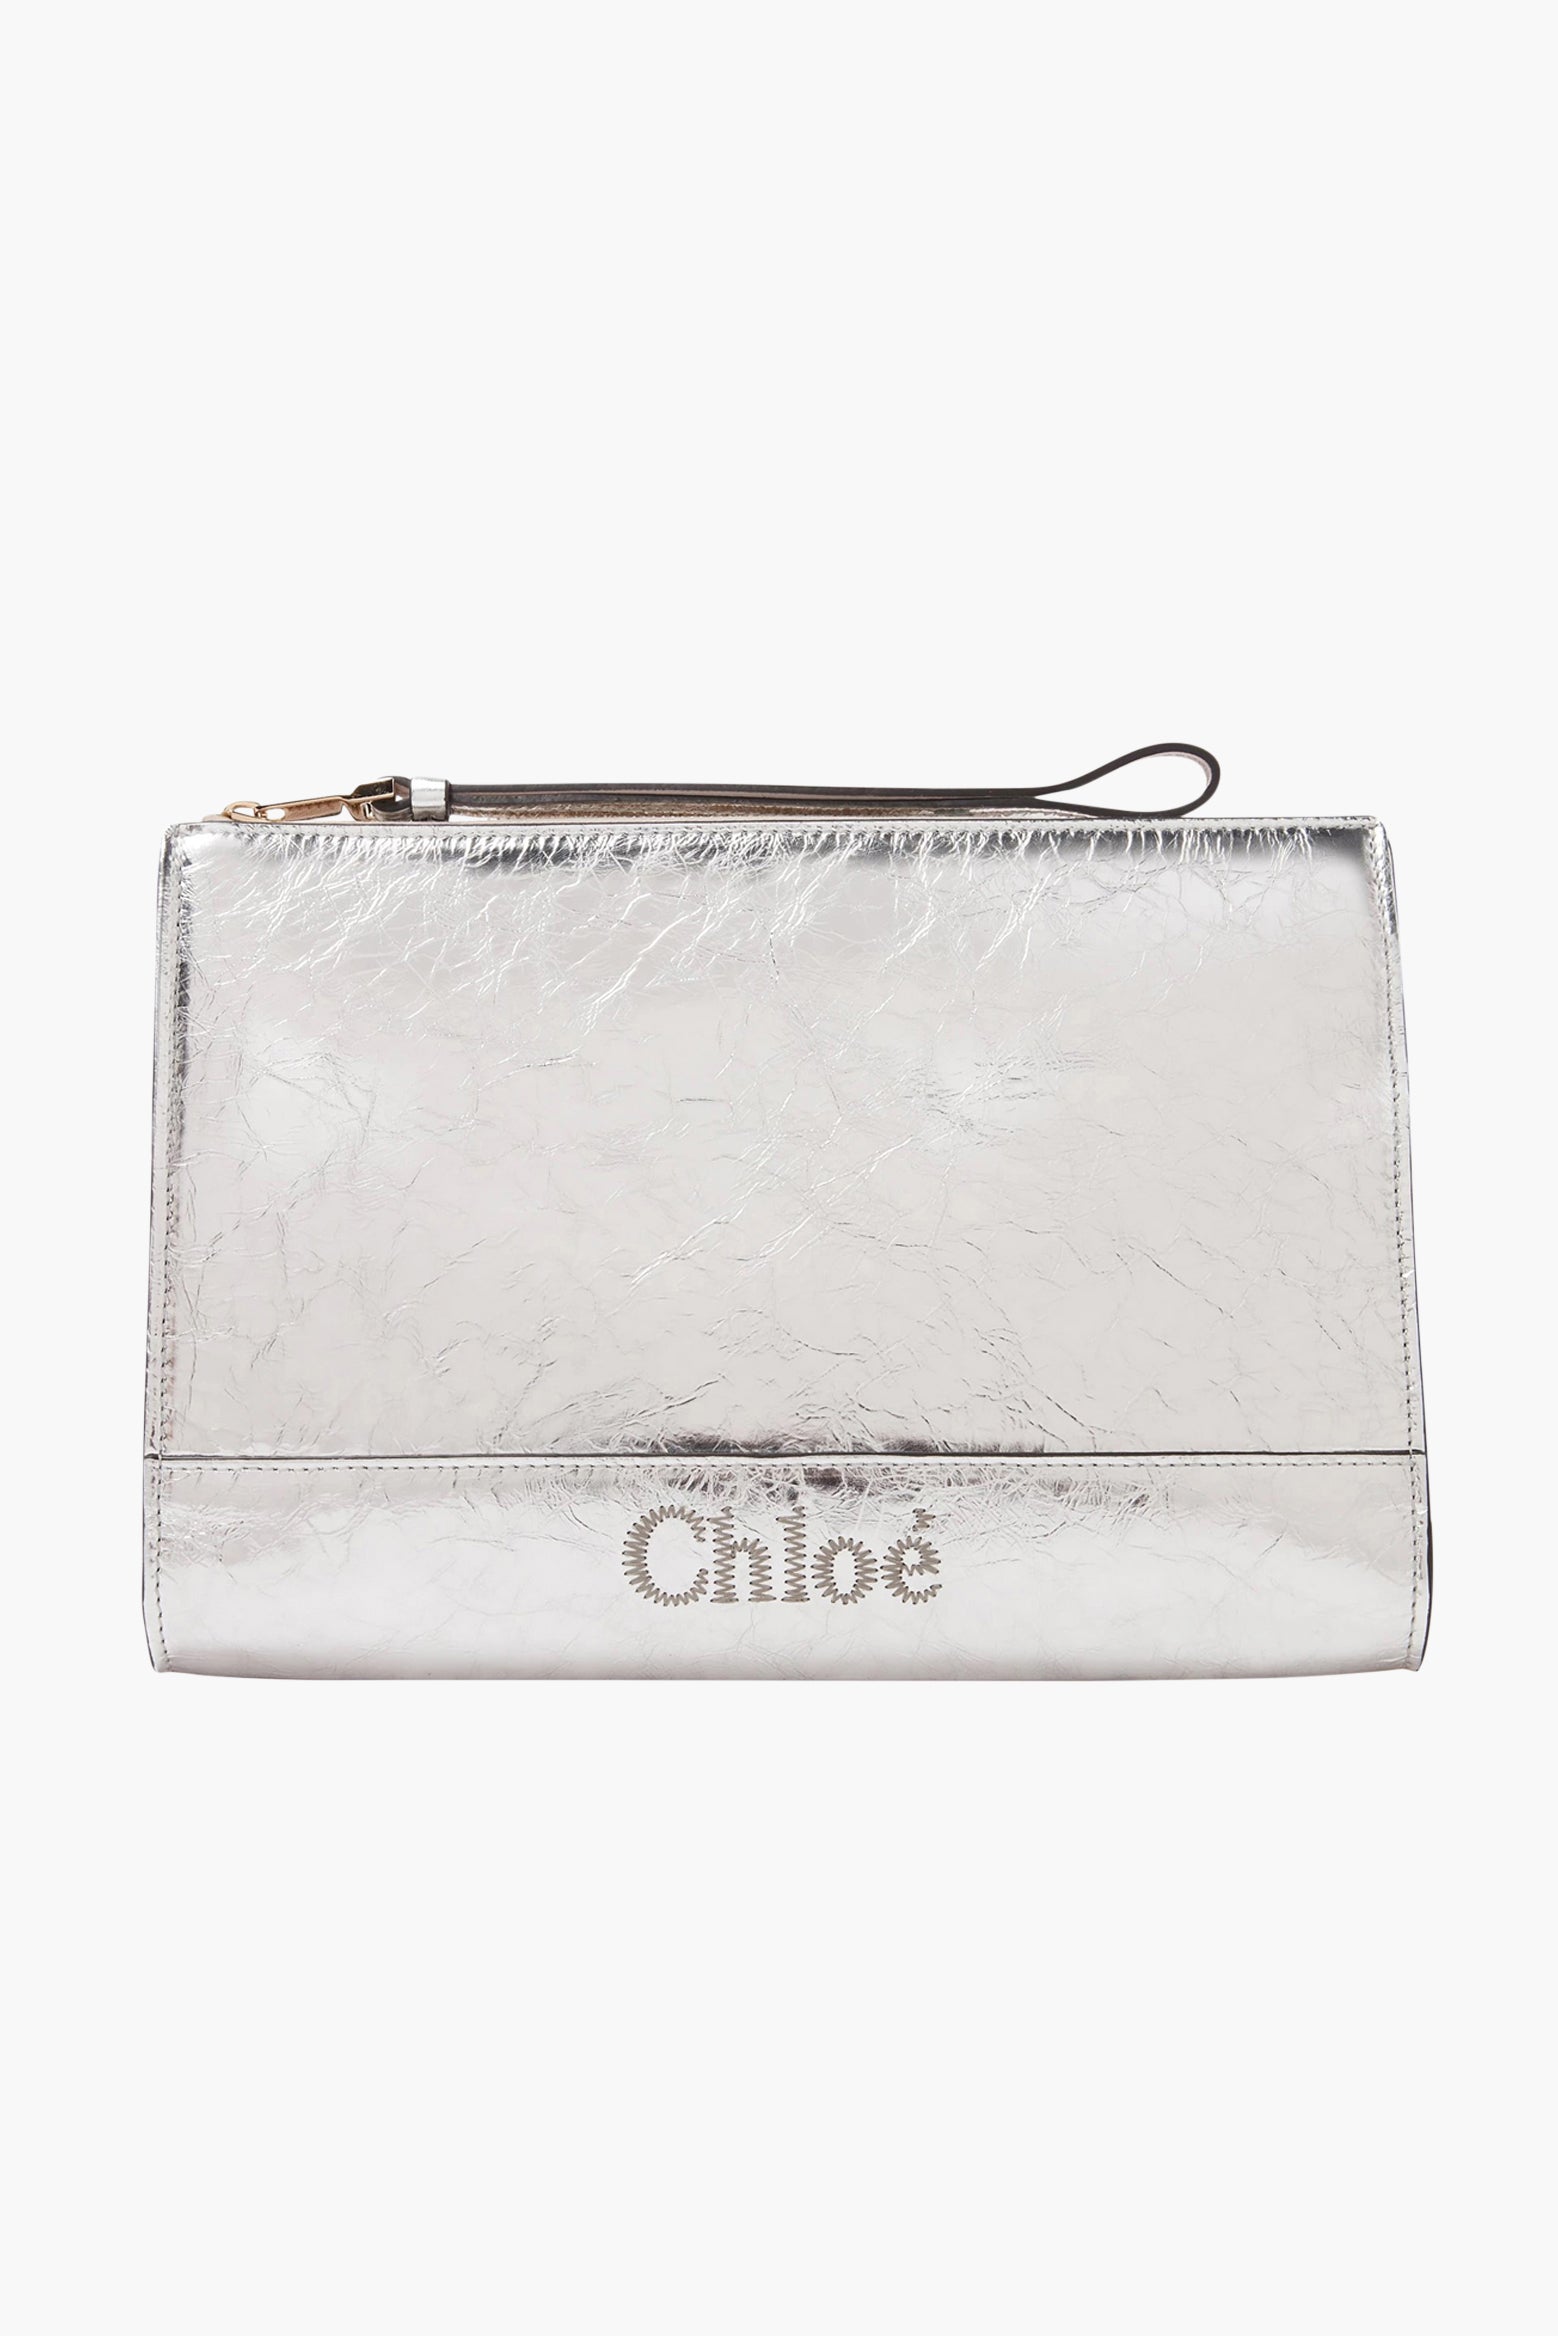 Chloe Sense Clutch in Silver available at TNT The New Trend Australia.